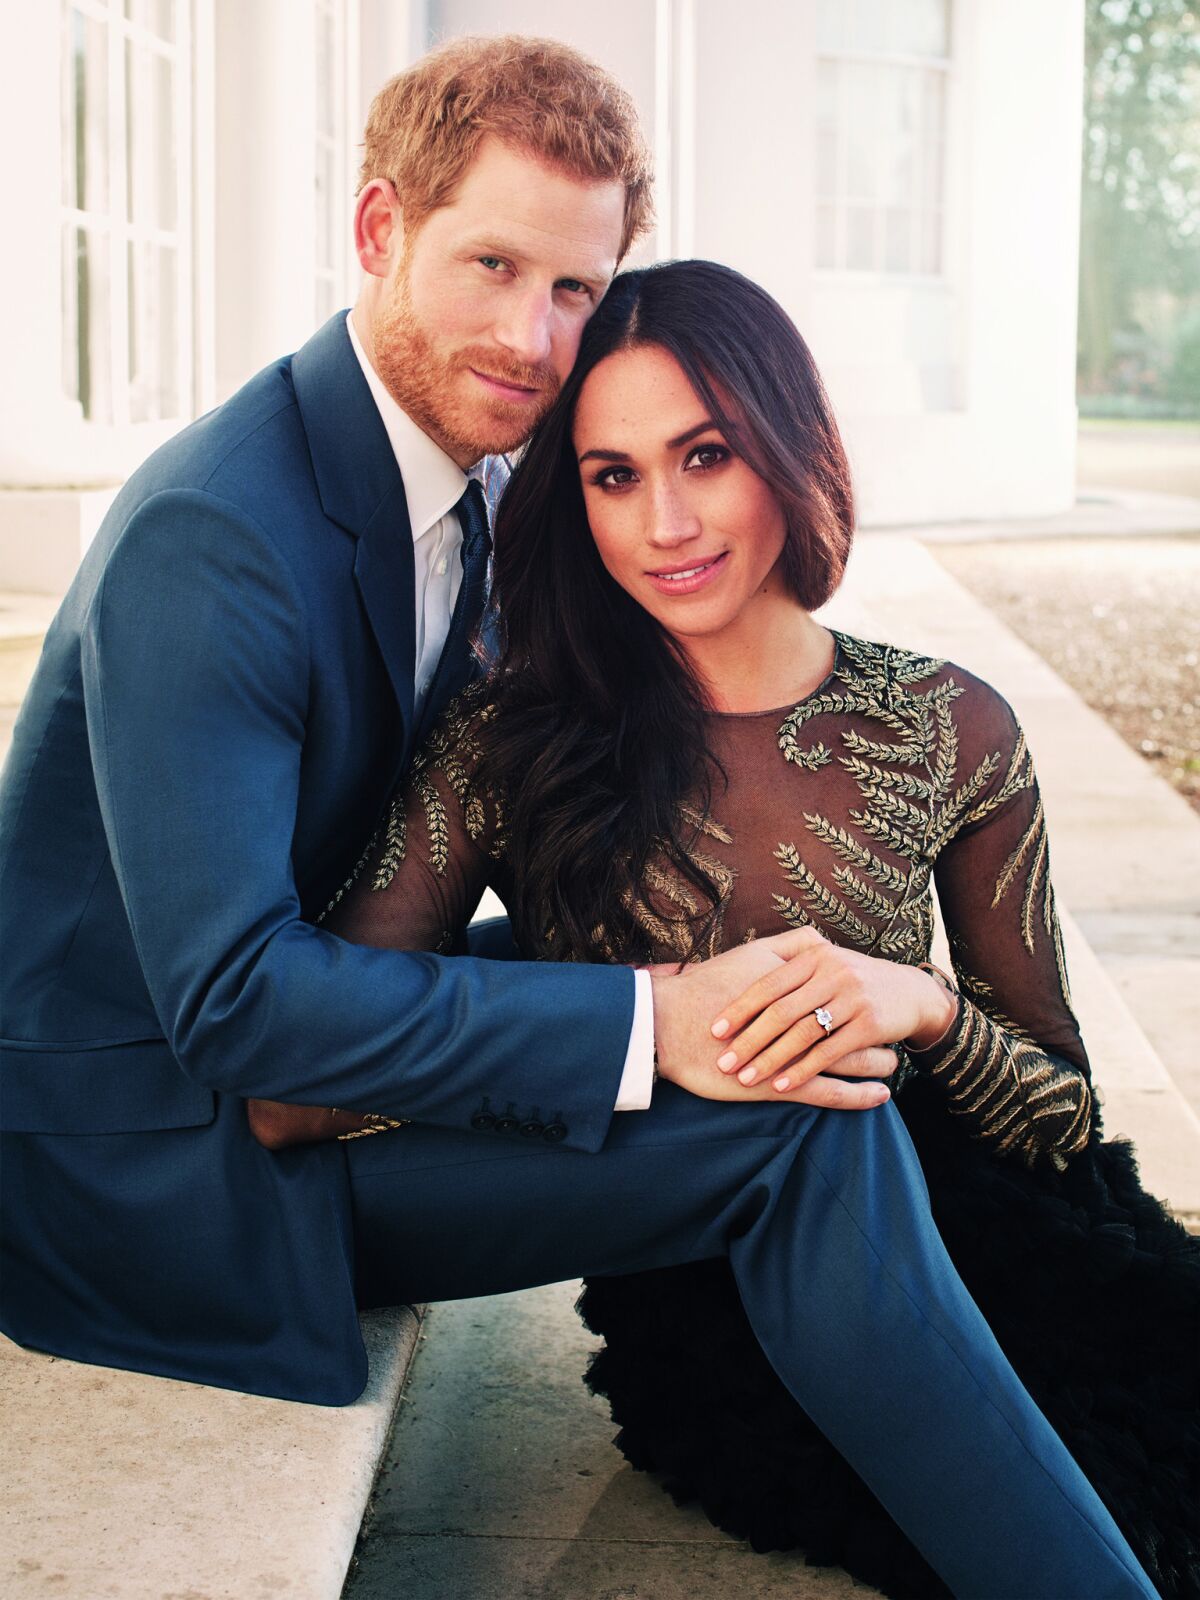 Prince Harry and Meghan Markle pose for one of two official engagement photos at Frogmore House in December 2017 in Windsor, United Kingdom.